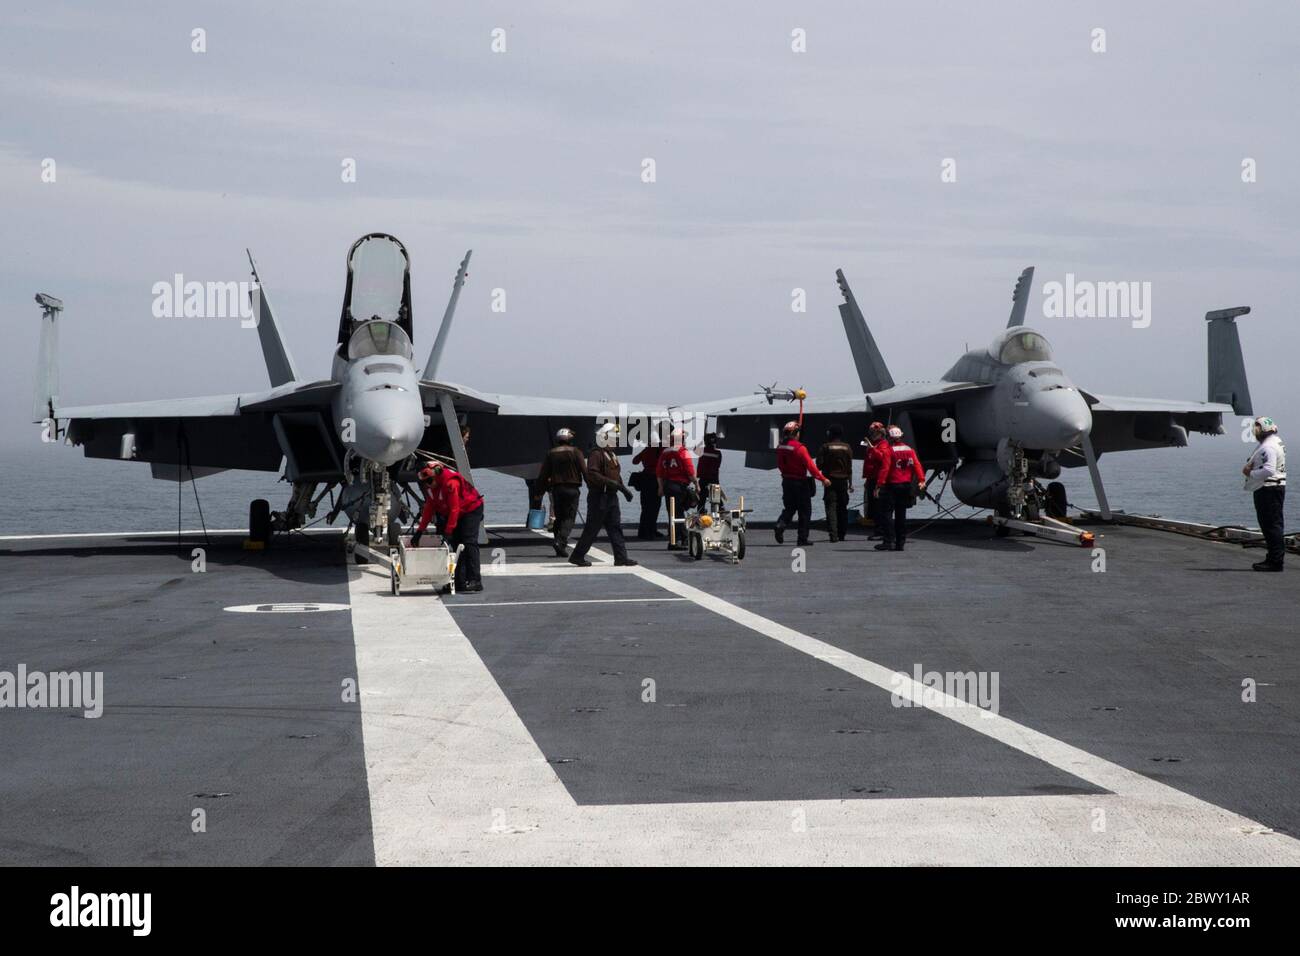 U.S. Navy Aviation Ordnancemen prepare two F/A-18E Super Hornet fighter aircraft for launch on the flight deck of the Ford-class aircraft carrier USS Gerald R. Ford May 30, 2020 in the Atlantic Ocean. Stock Photo